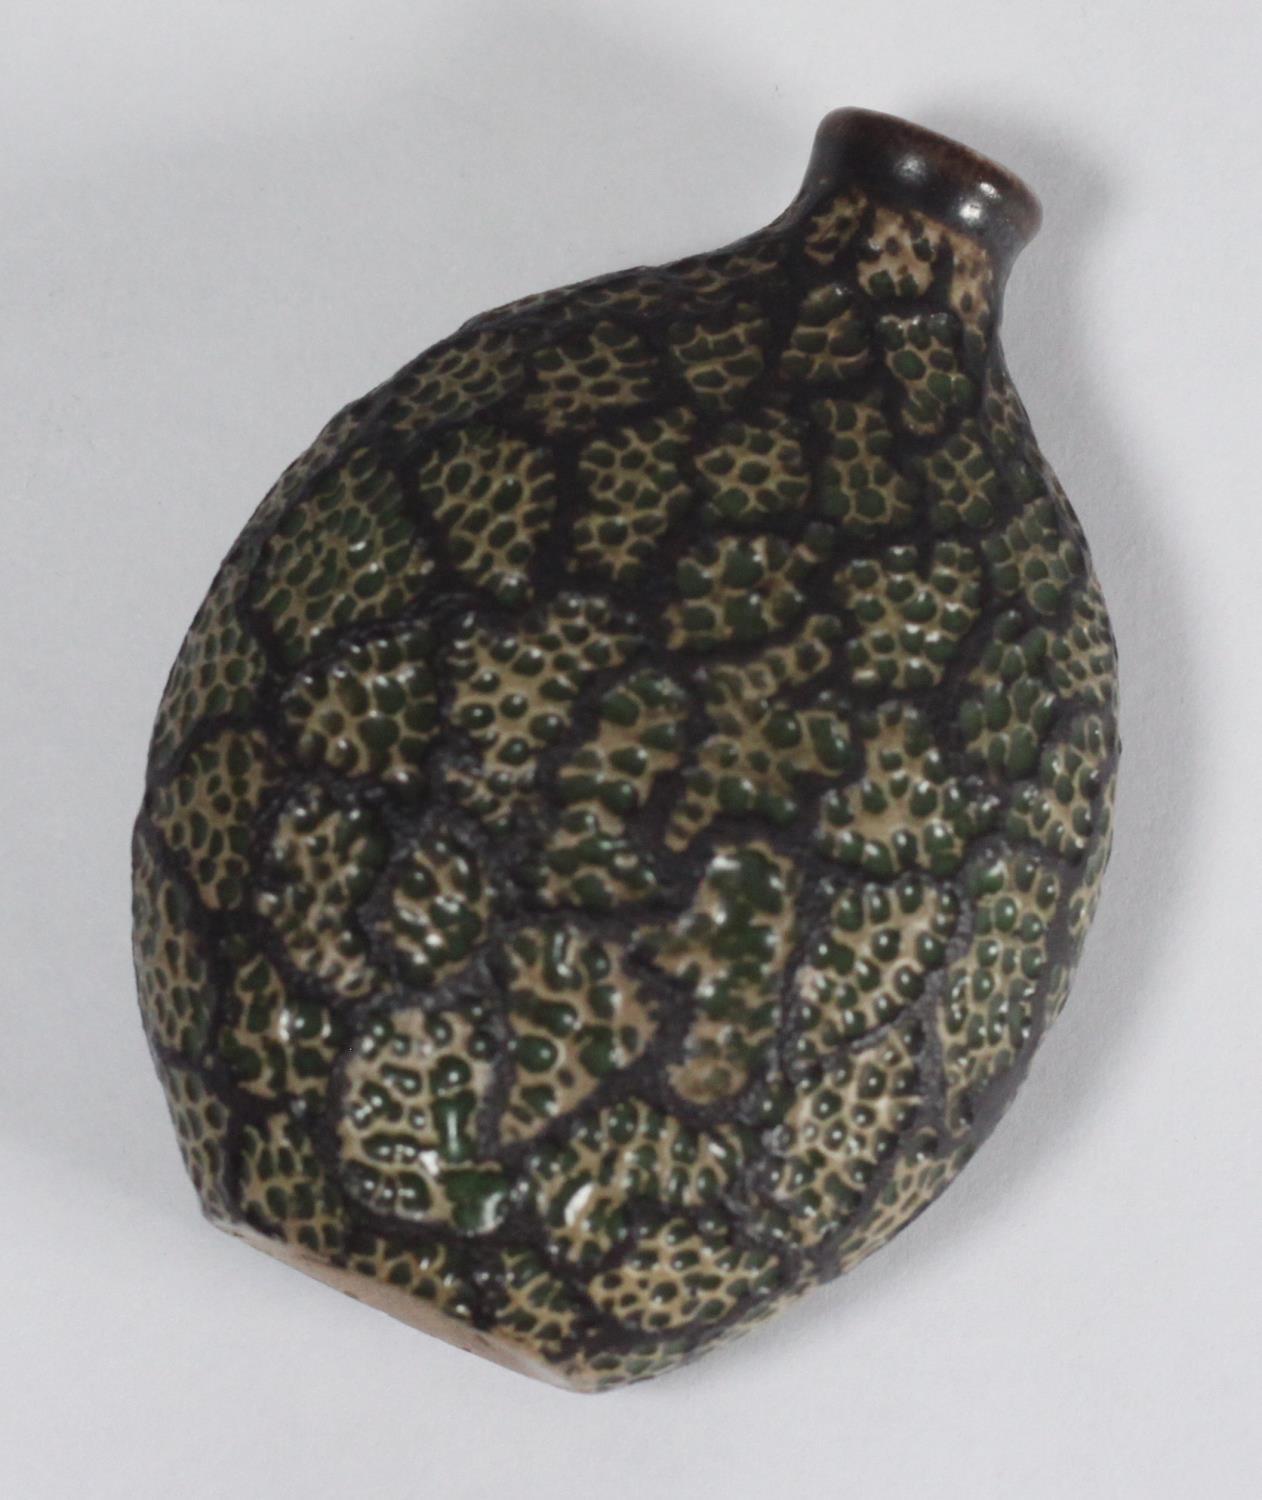 A small Martin Brothers vase of ovoid snuff bottle form with cylindrical neck, the body decorated in